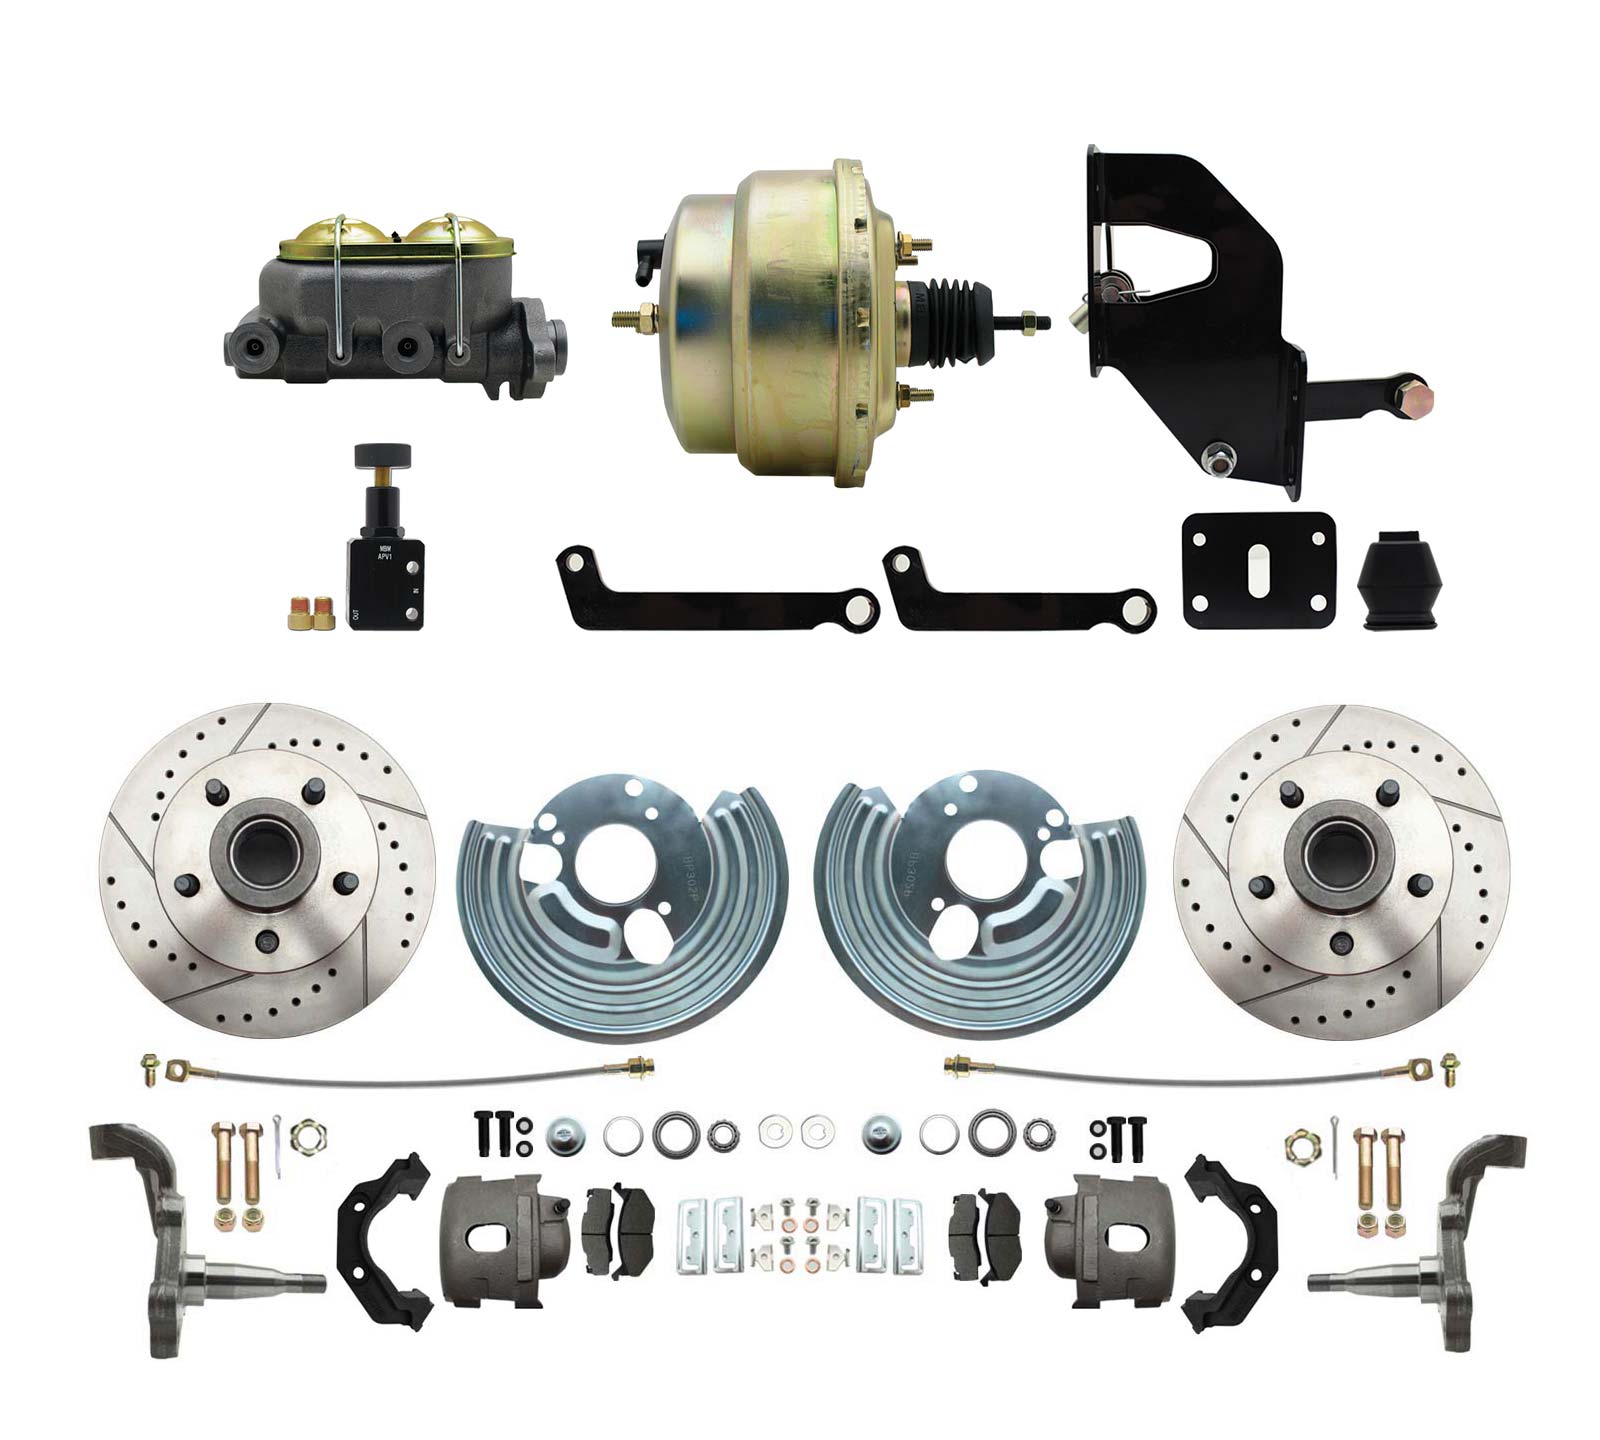 1962-1972 Mopar B & E Body  Front Disc Brake Conversion Kit W/ Drilled & Slotted Rotors ( Charger, Challenger, Coronet) W/ 8 Dual Zinc Booster Conversion Kit W/ Adjustable Proportioning Valve